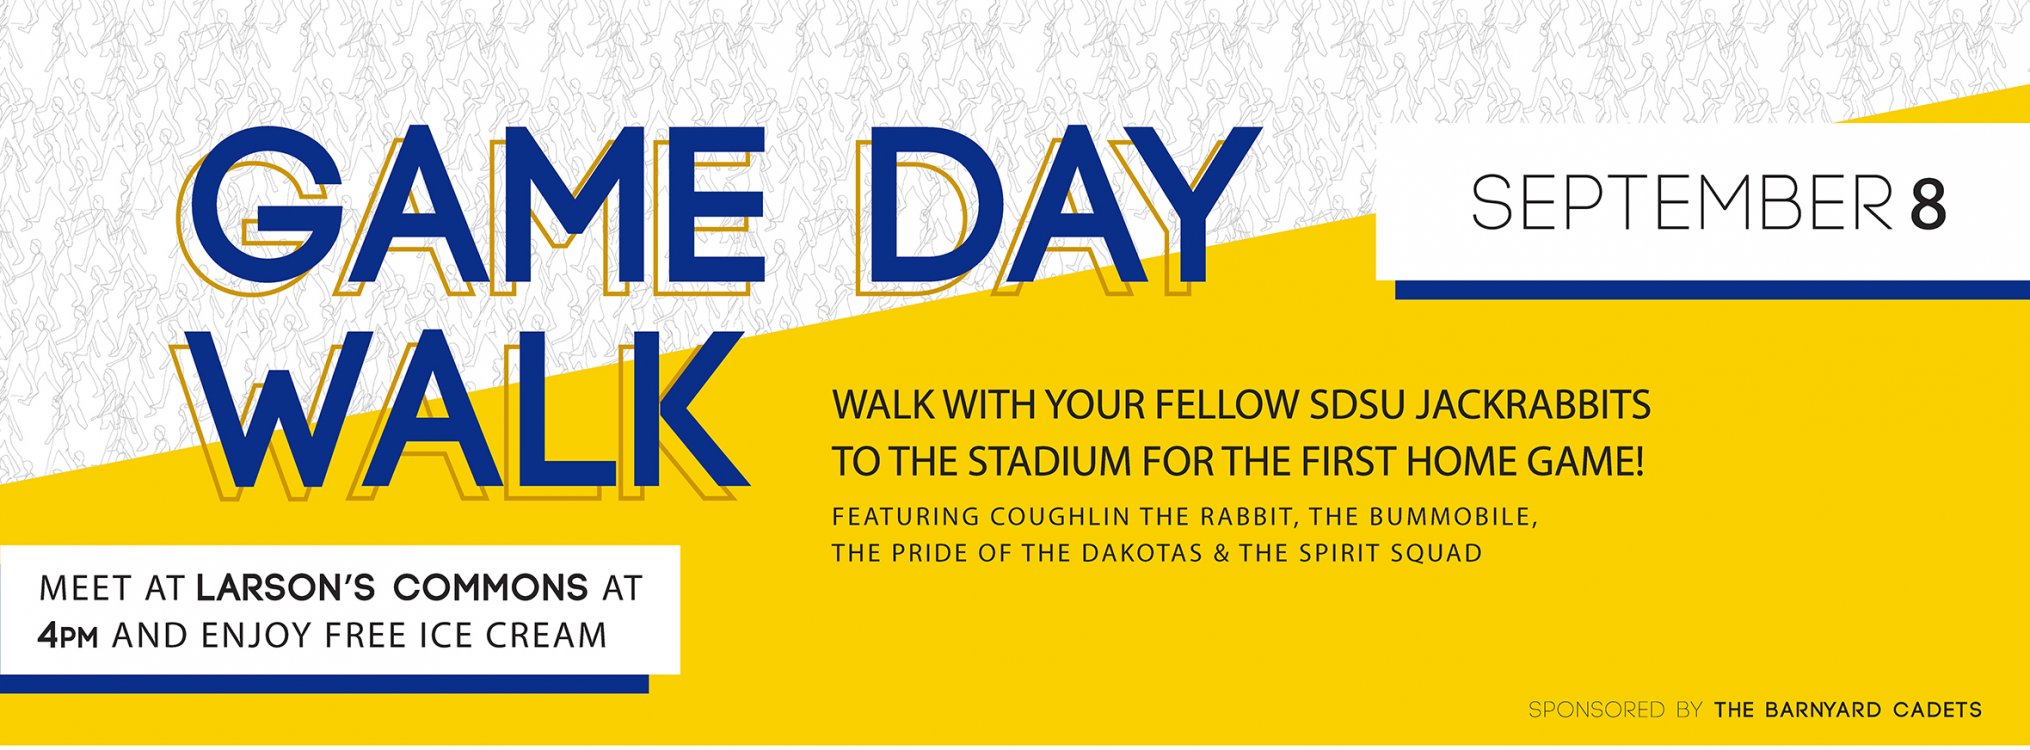 Game Day Walk promotional interior banner